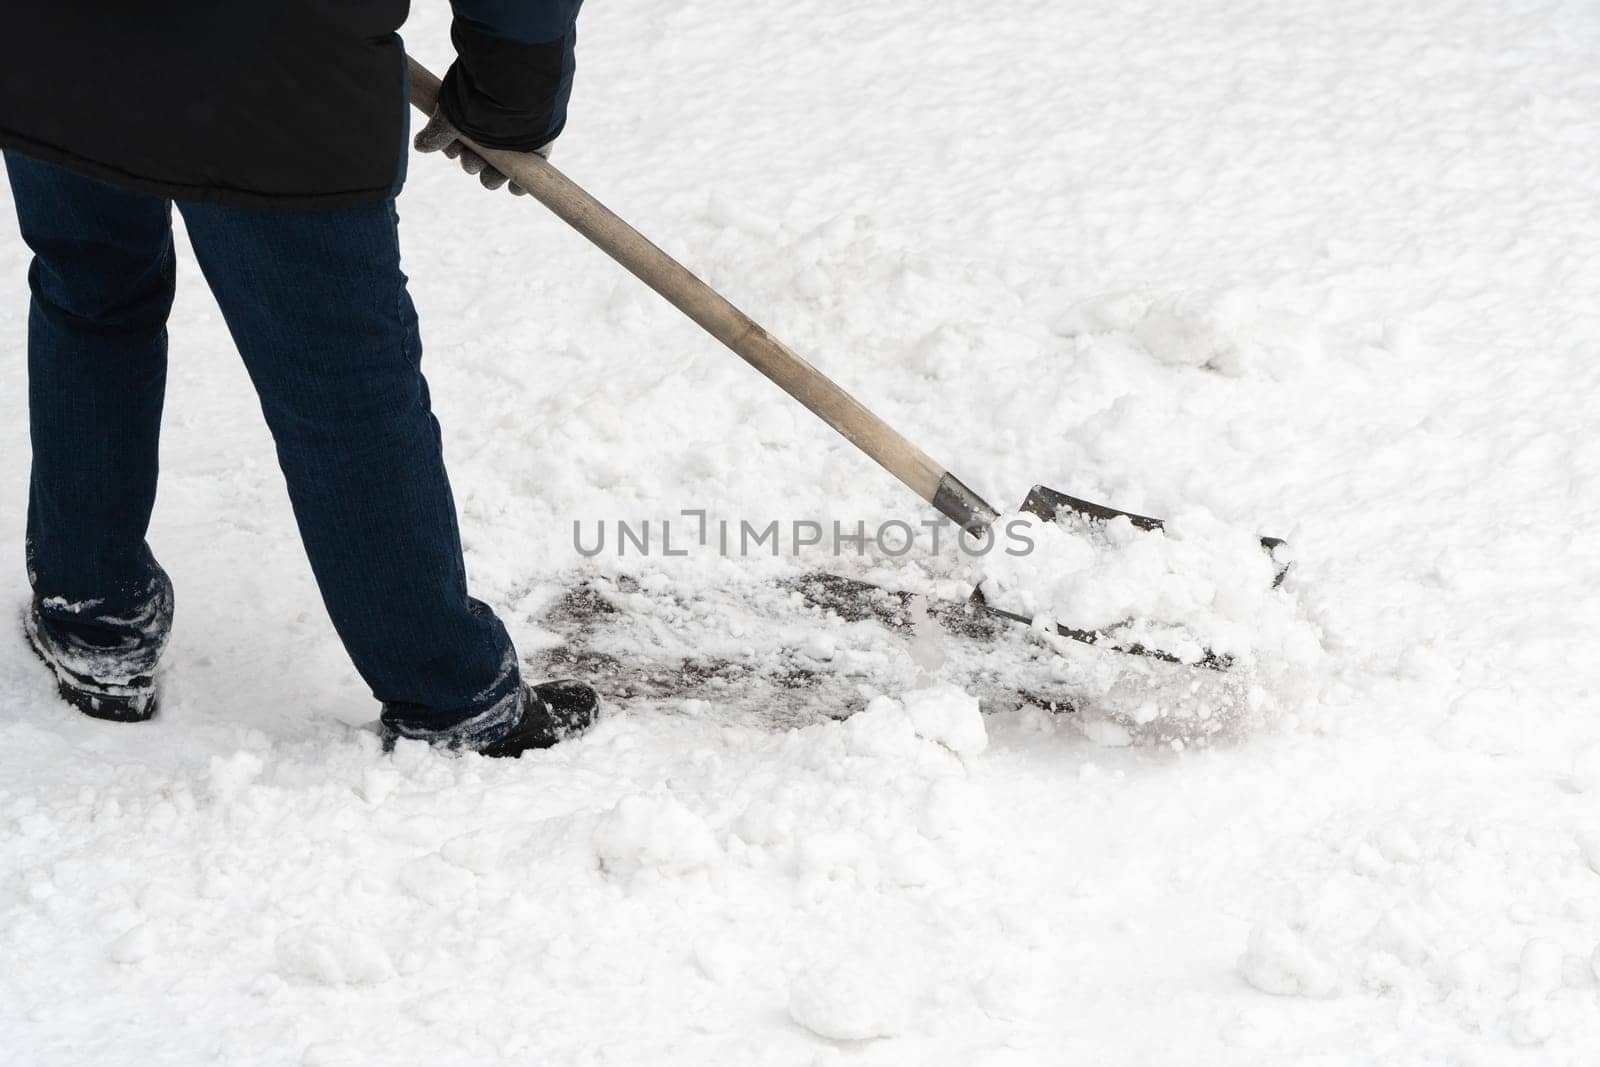 A man clearing away the freshly fallen snow with trusty iron shovel, complete with a wooden handle by Alexander-Piragis